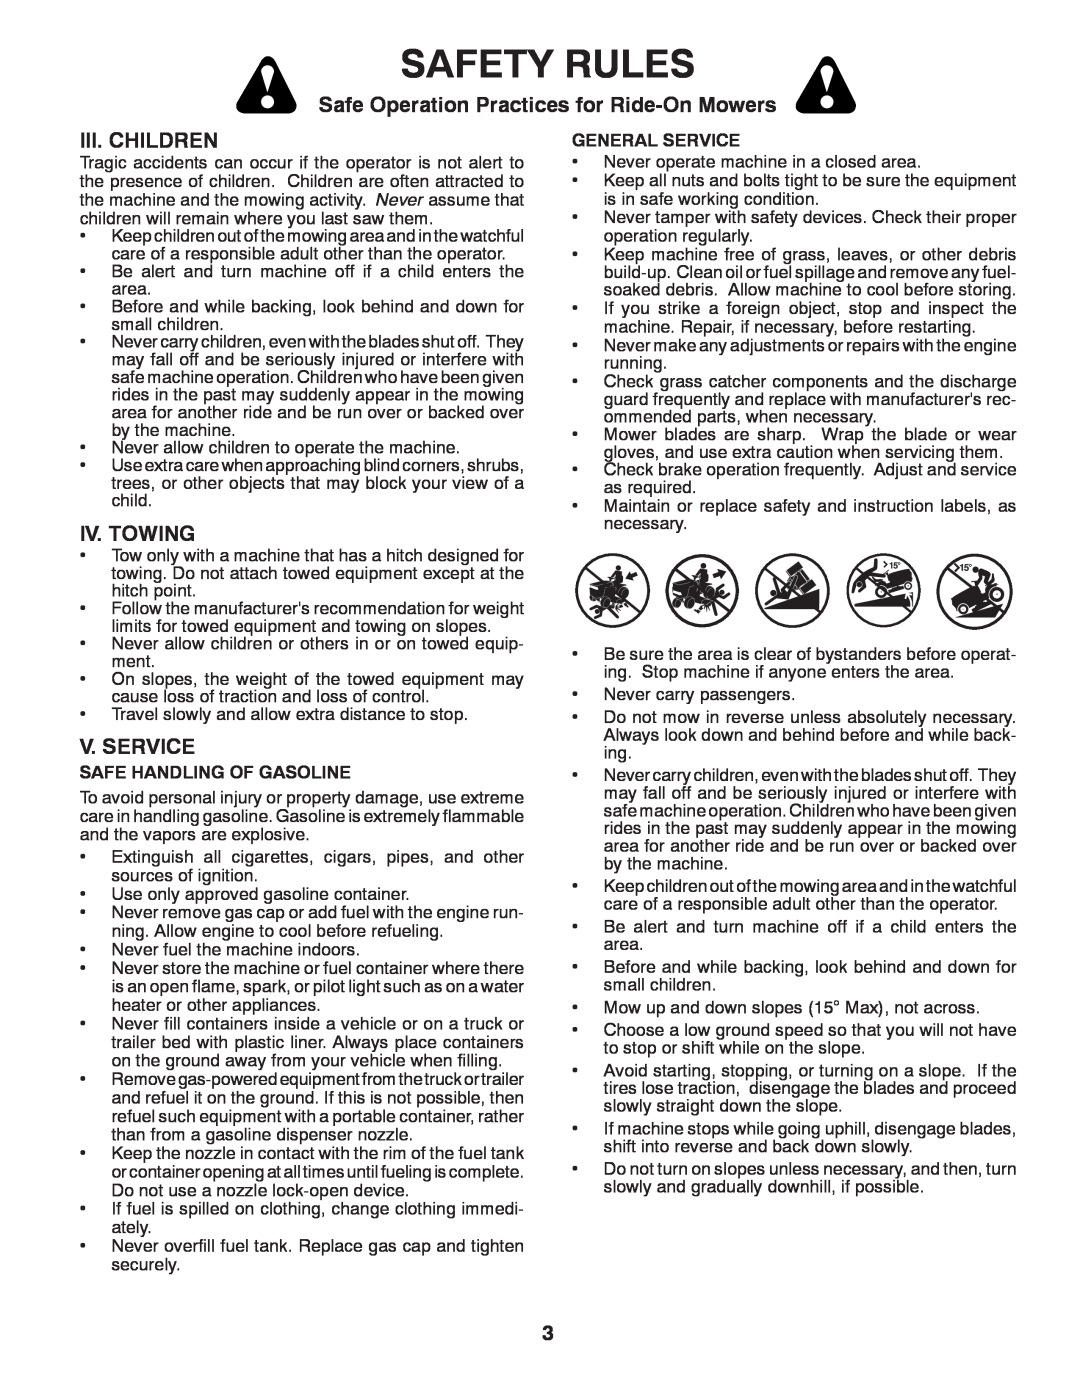 Husqvarna YTH2454 Iii. Children, Iv. Towing, V. Service, Safety Rules, Safe Operation Practices for Ride-OnMowers 